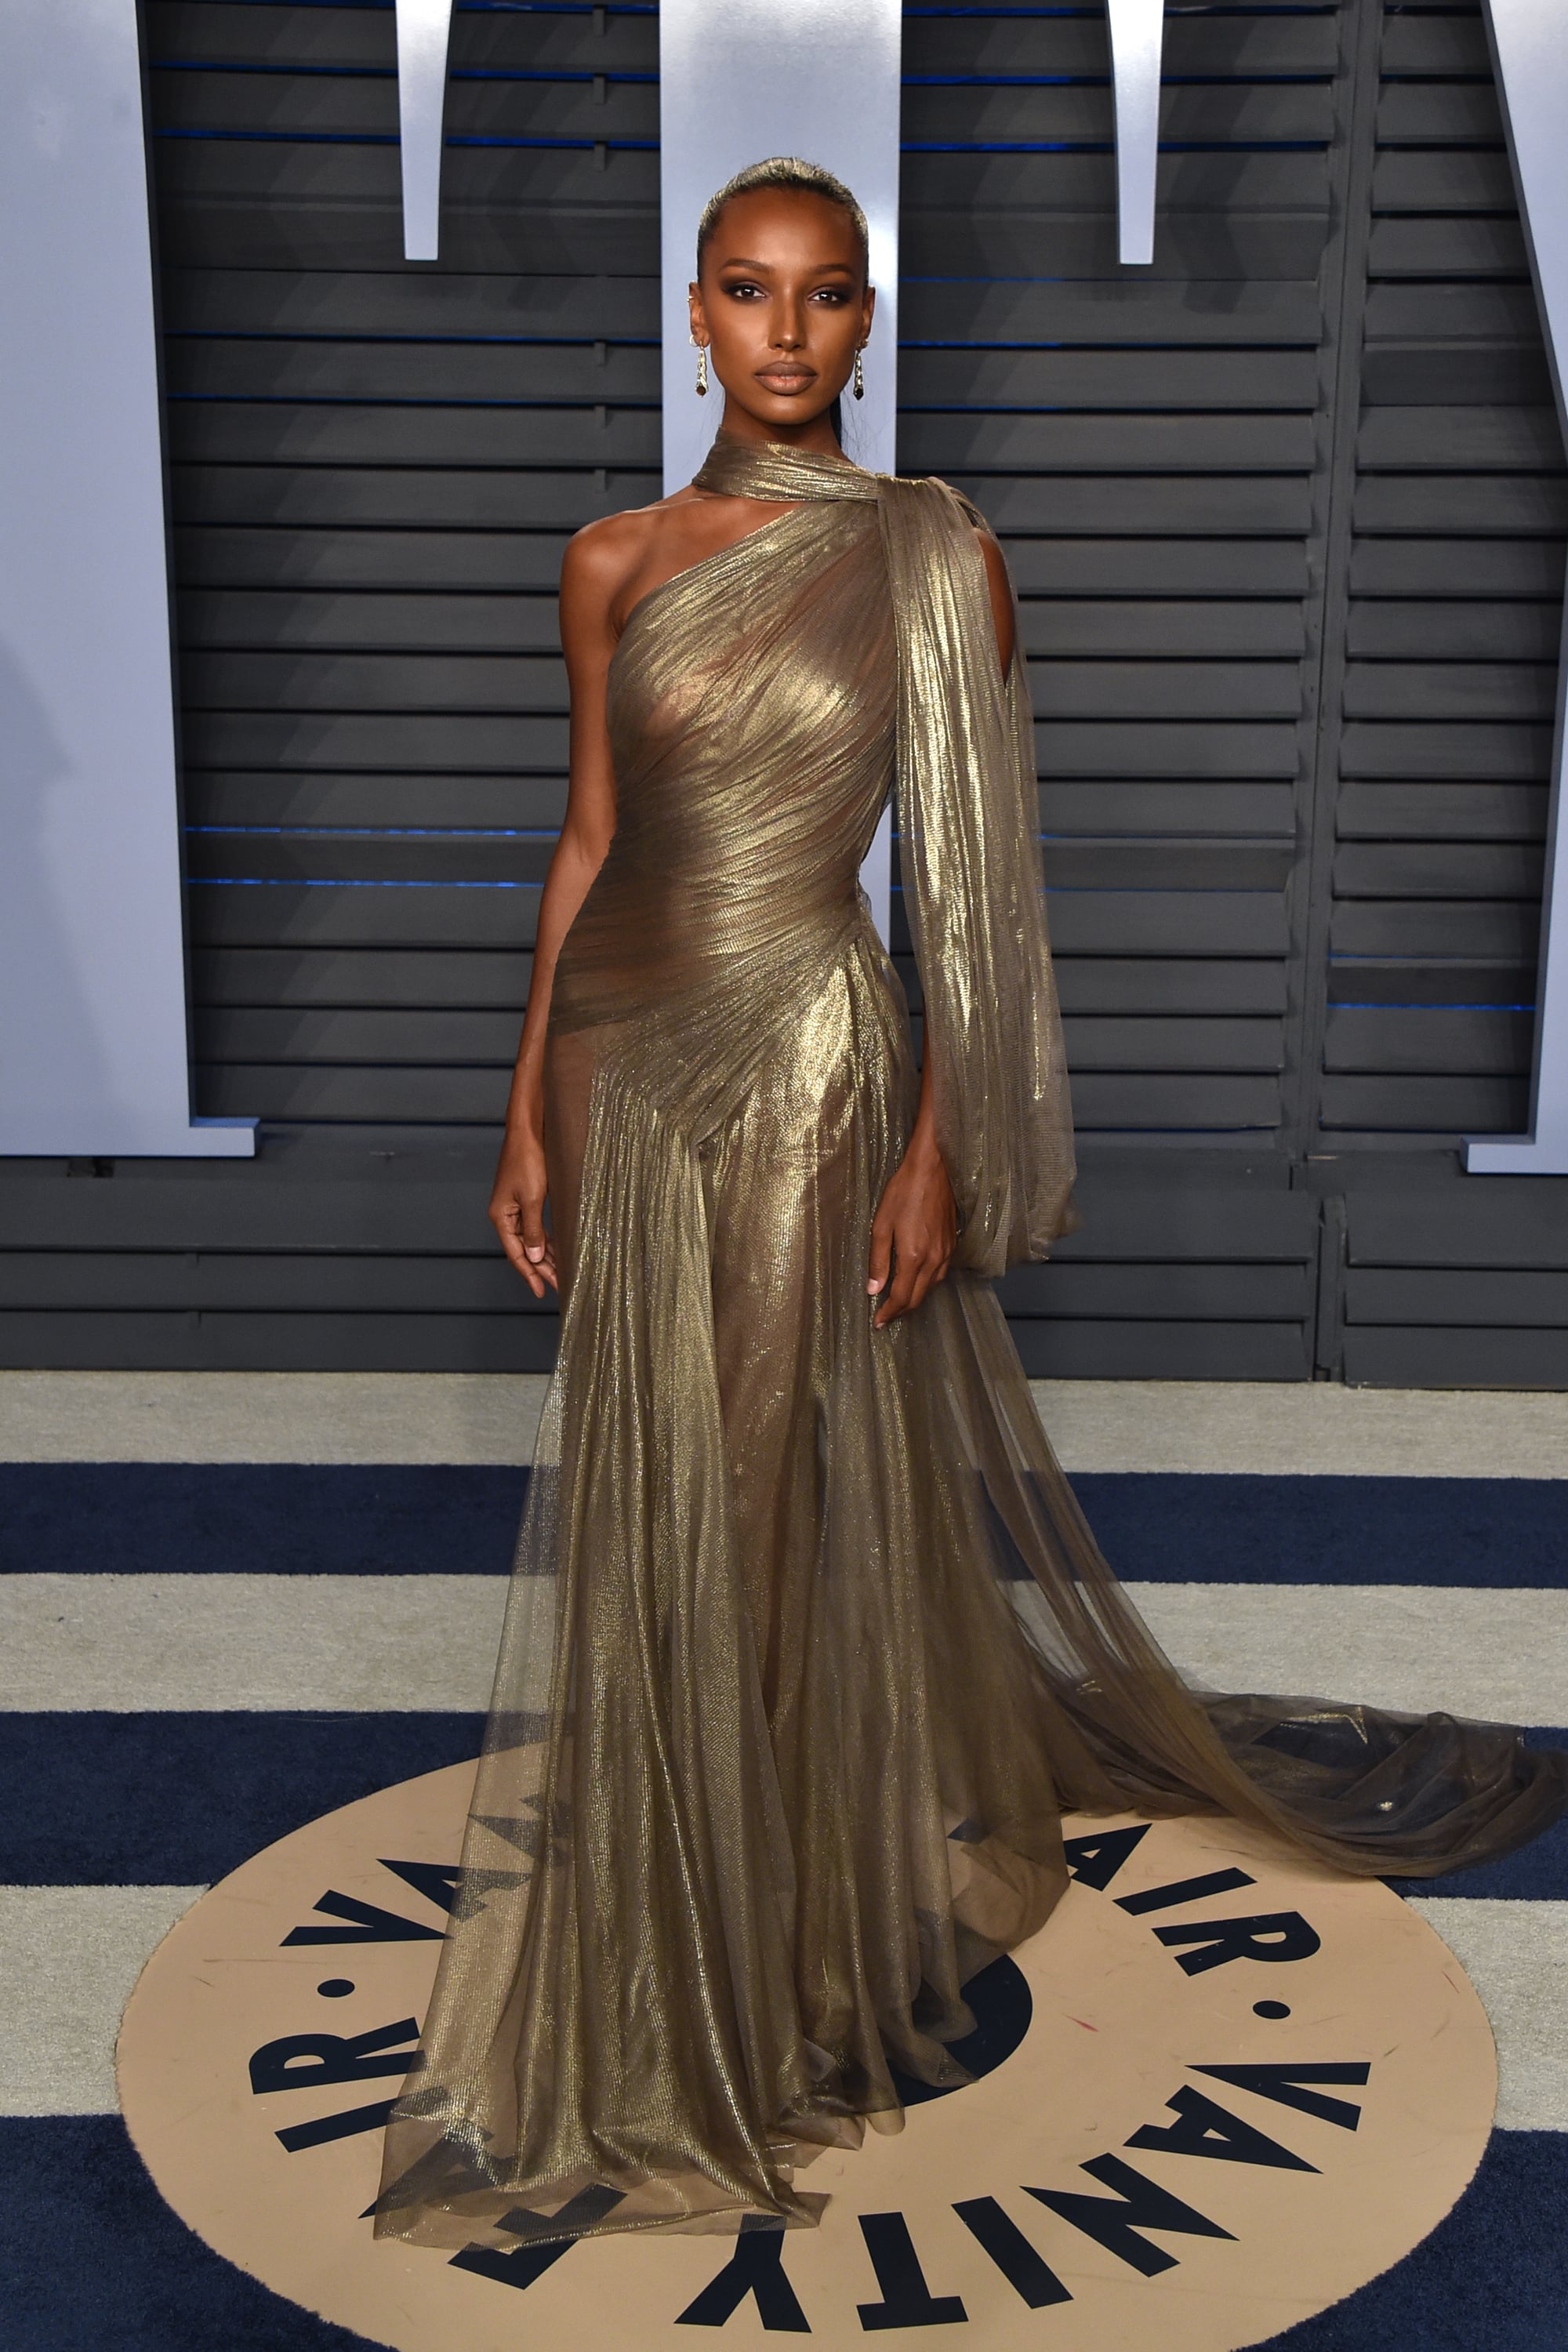 Metallic Dresses Were Popular at the Academy Awards